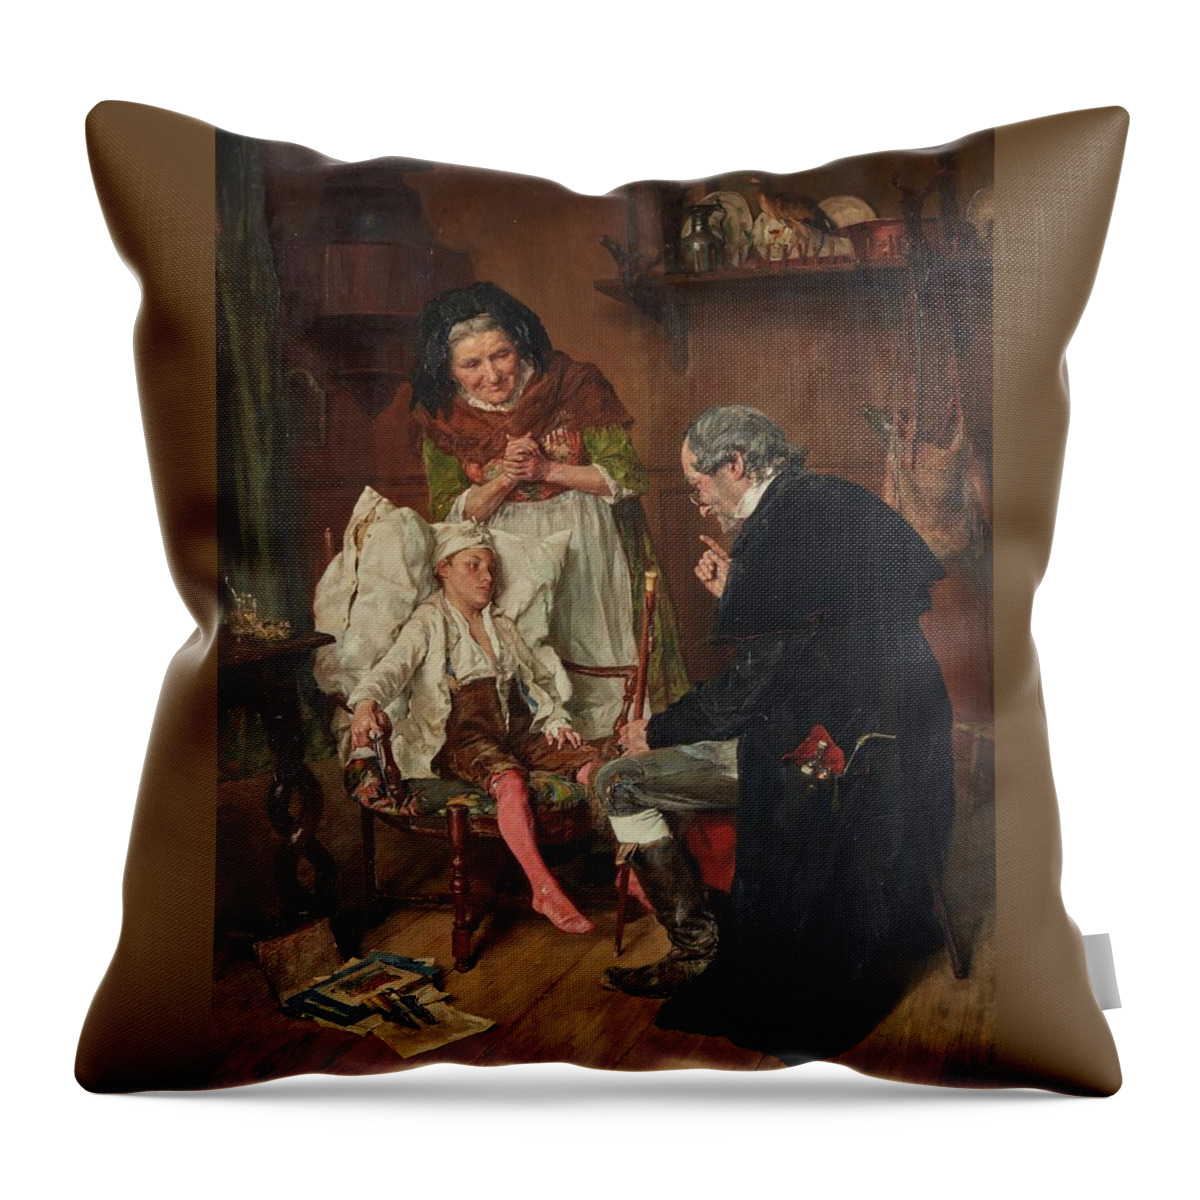 François-adolphe Grison 1845-1914 The Doctor Throw Pillow featuring the painting The Doctor by MotionAge Designs